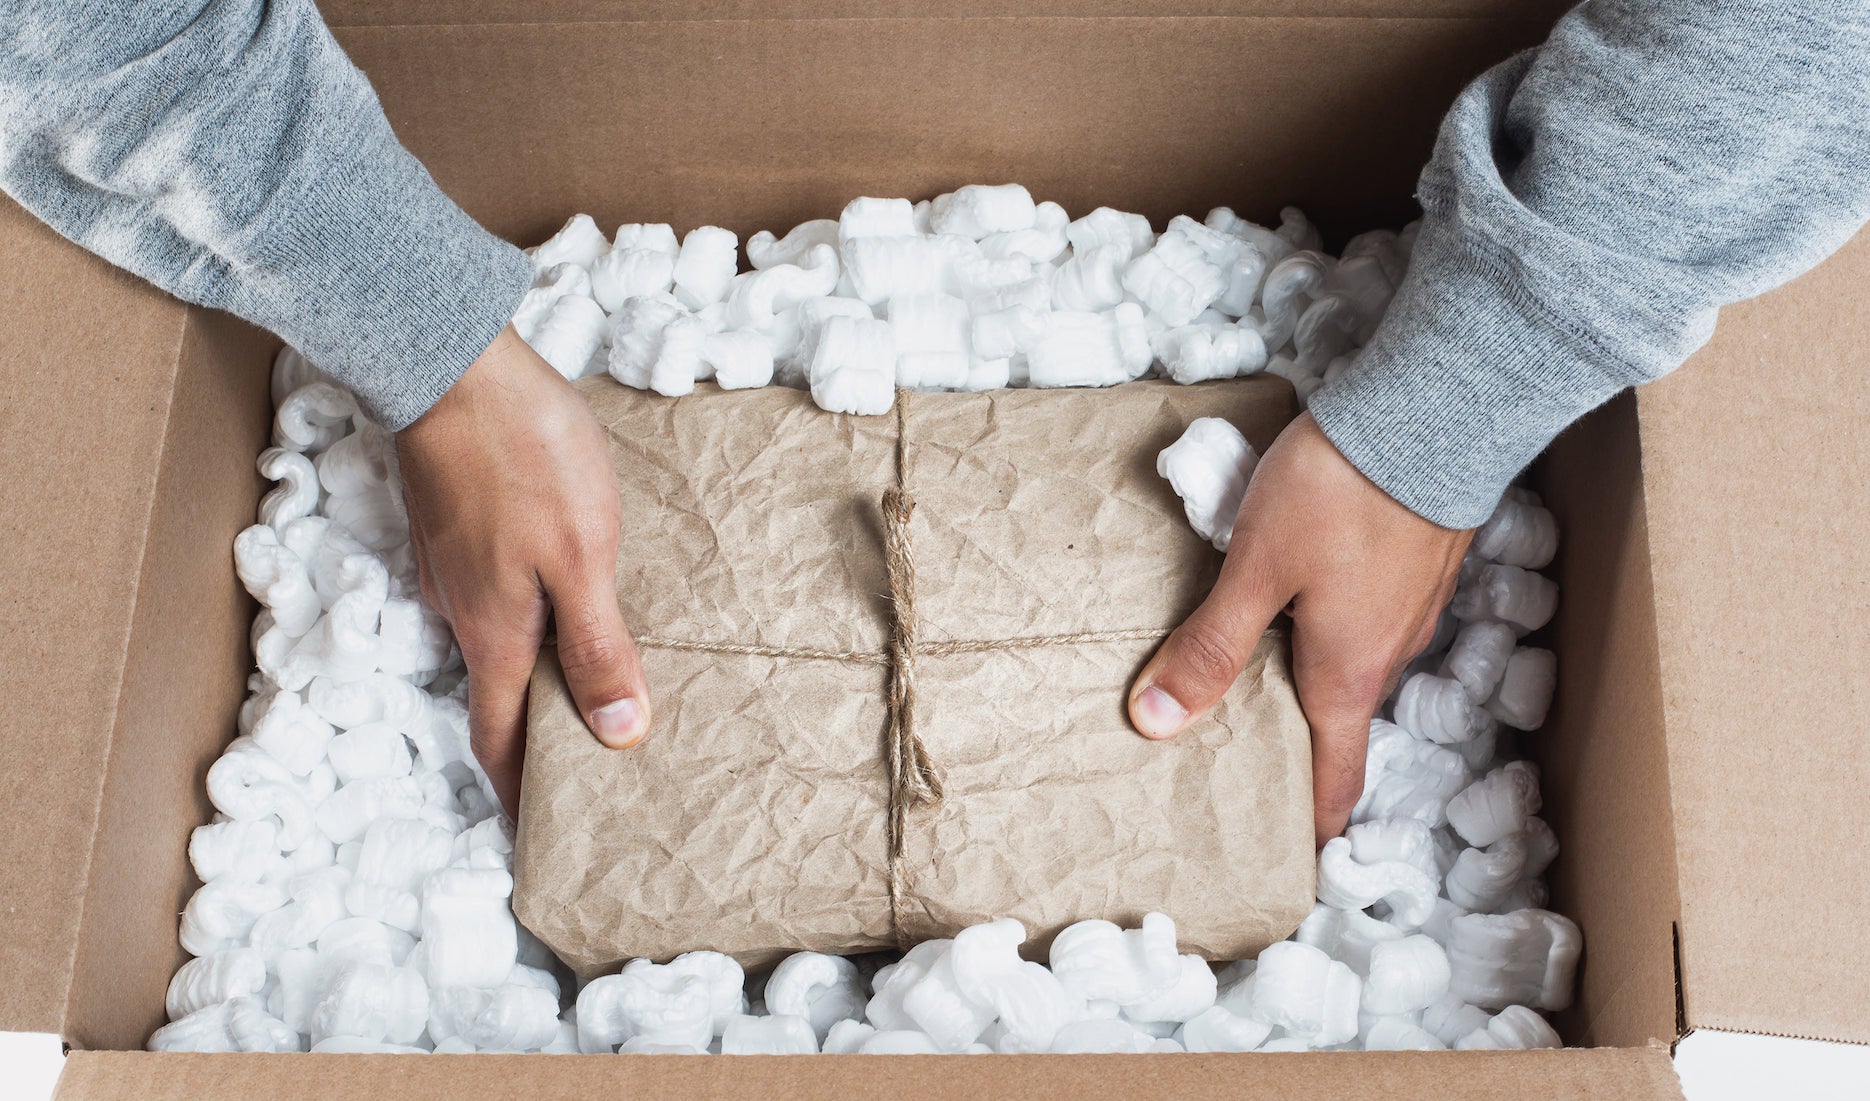 A person places a brown paper wrapped package into a box full of packing peanuts